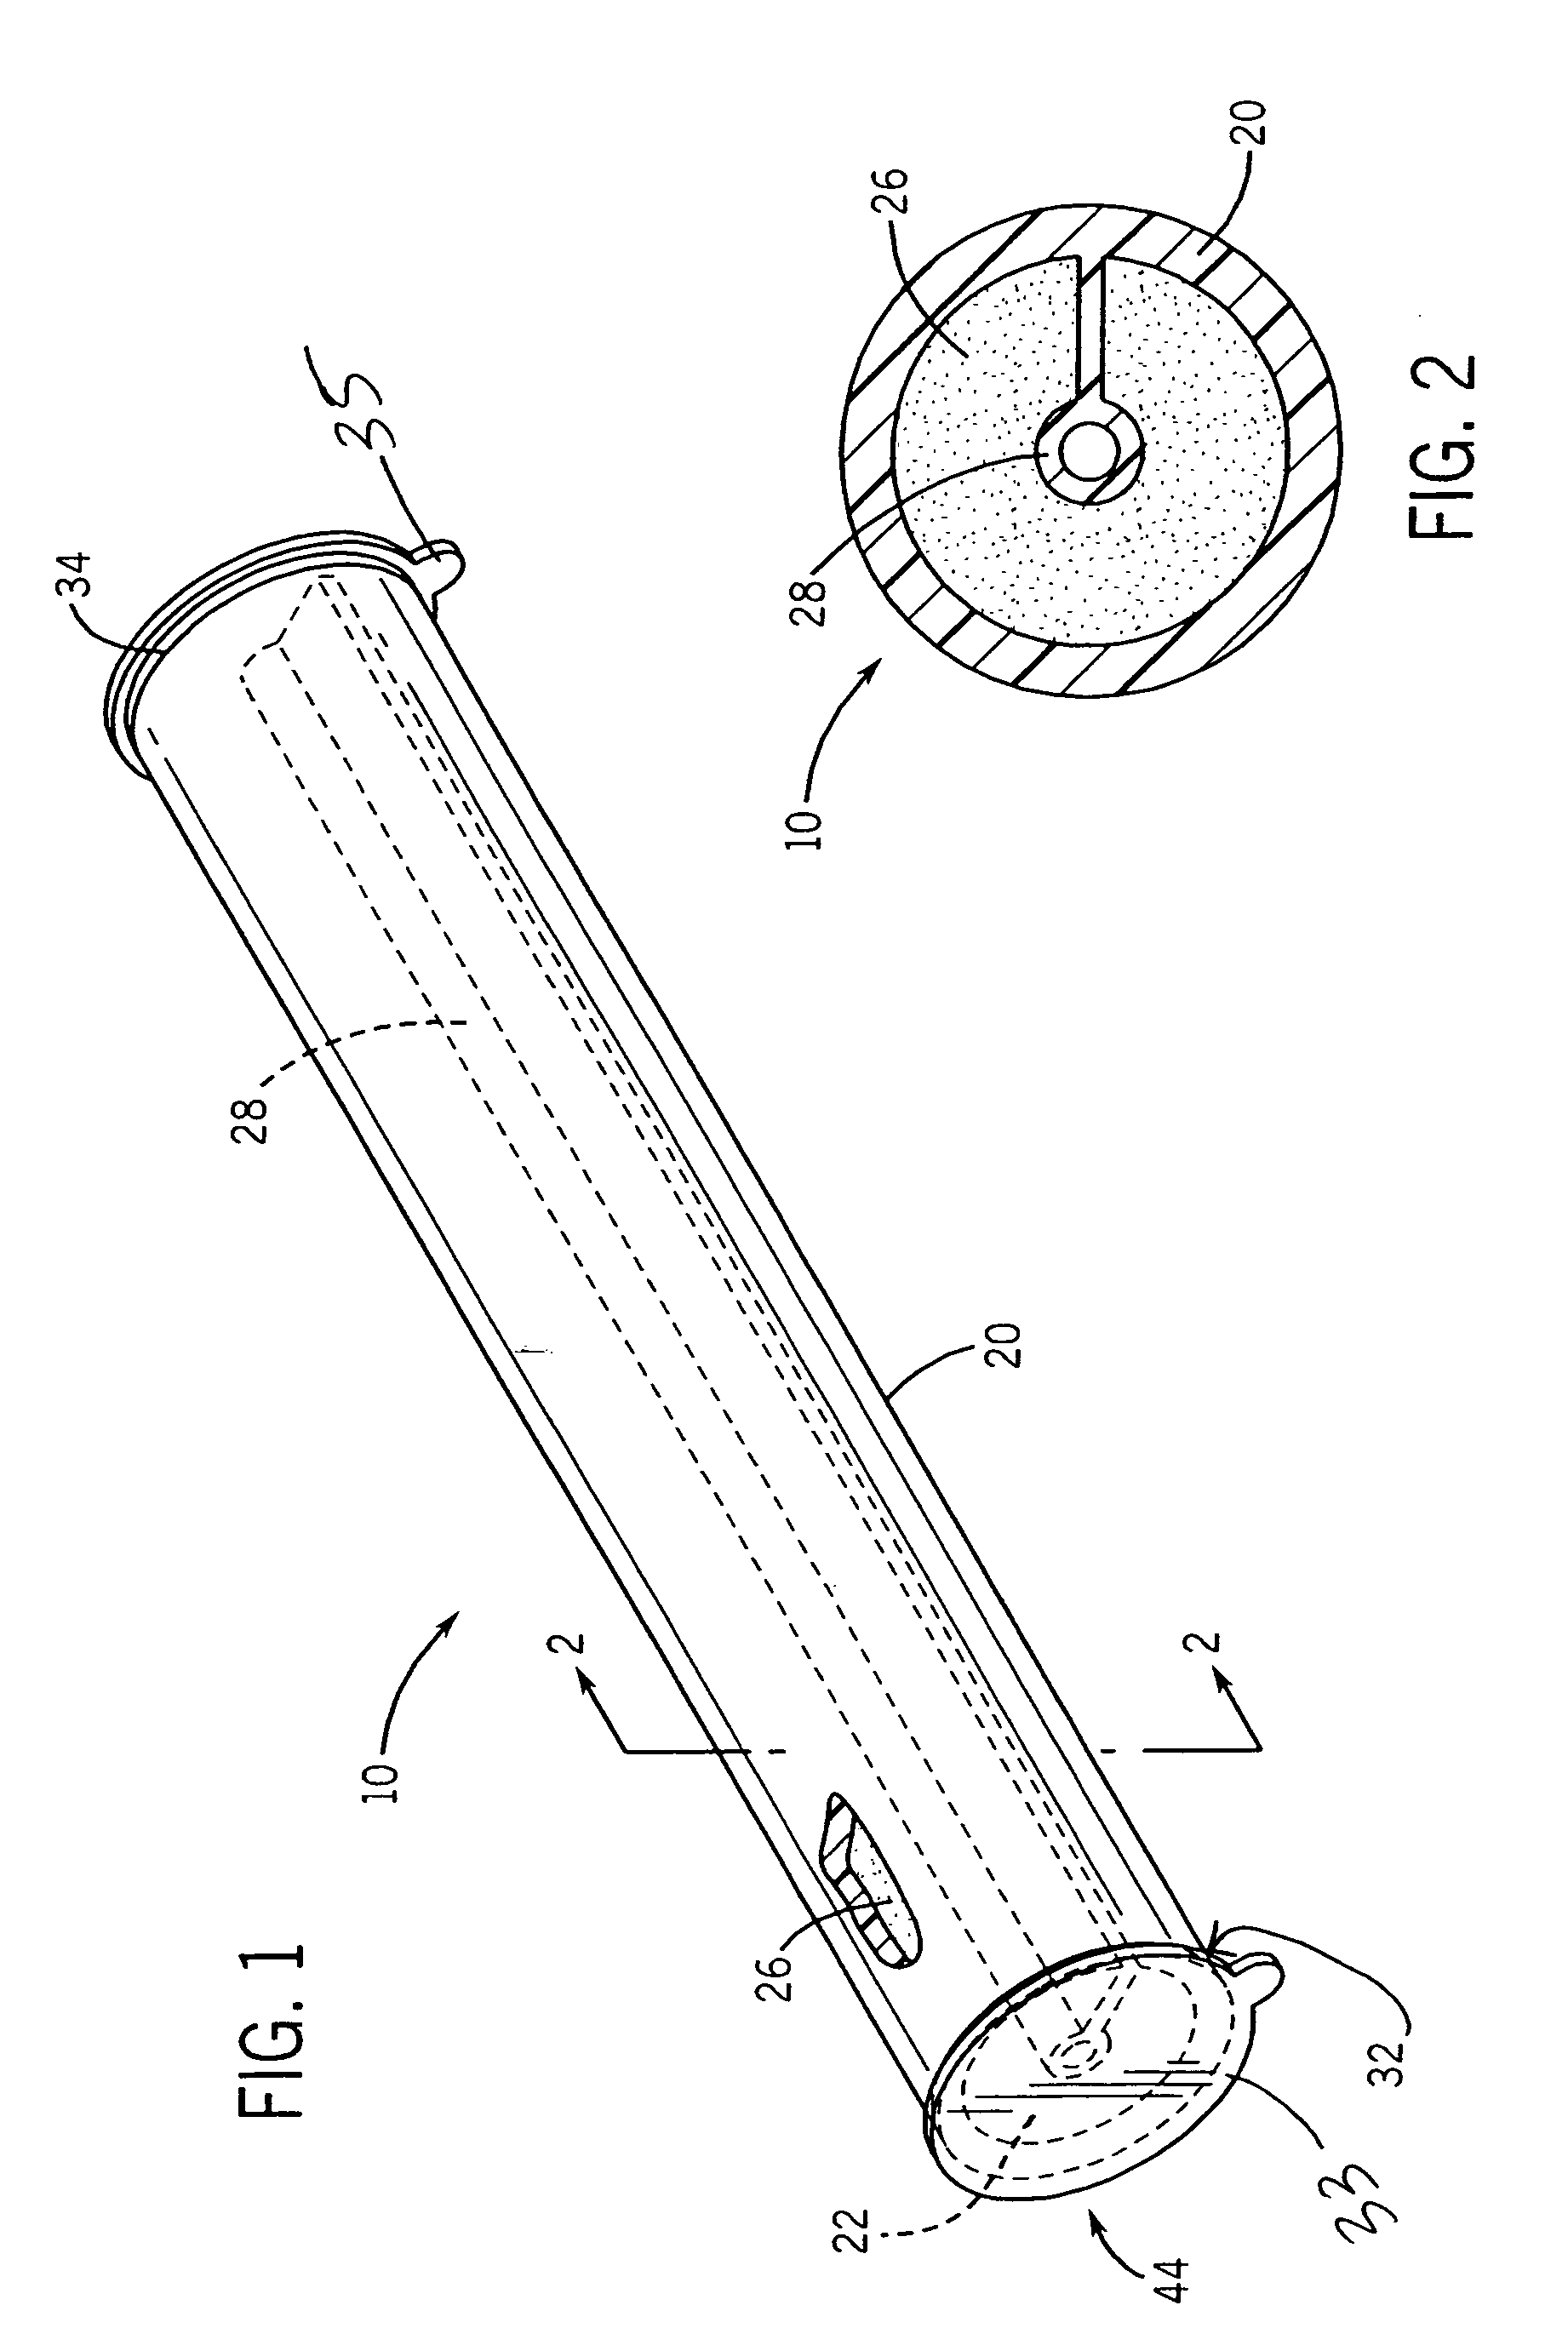 Device, method, and composition for reducing the incidence of tobacco smoking